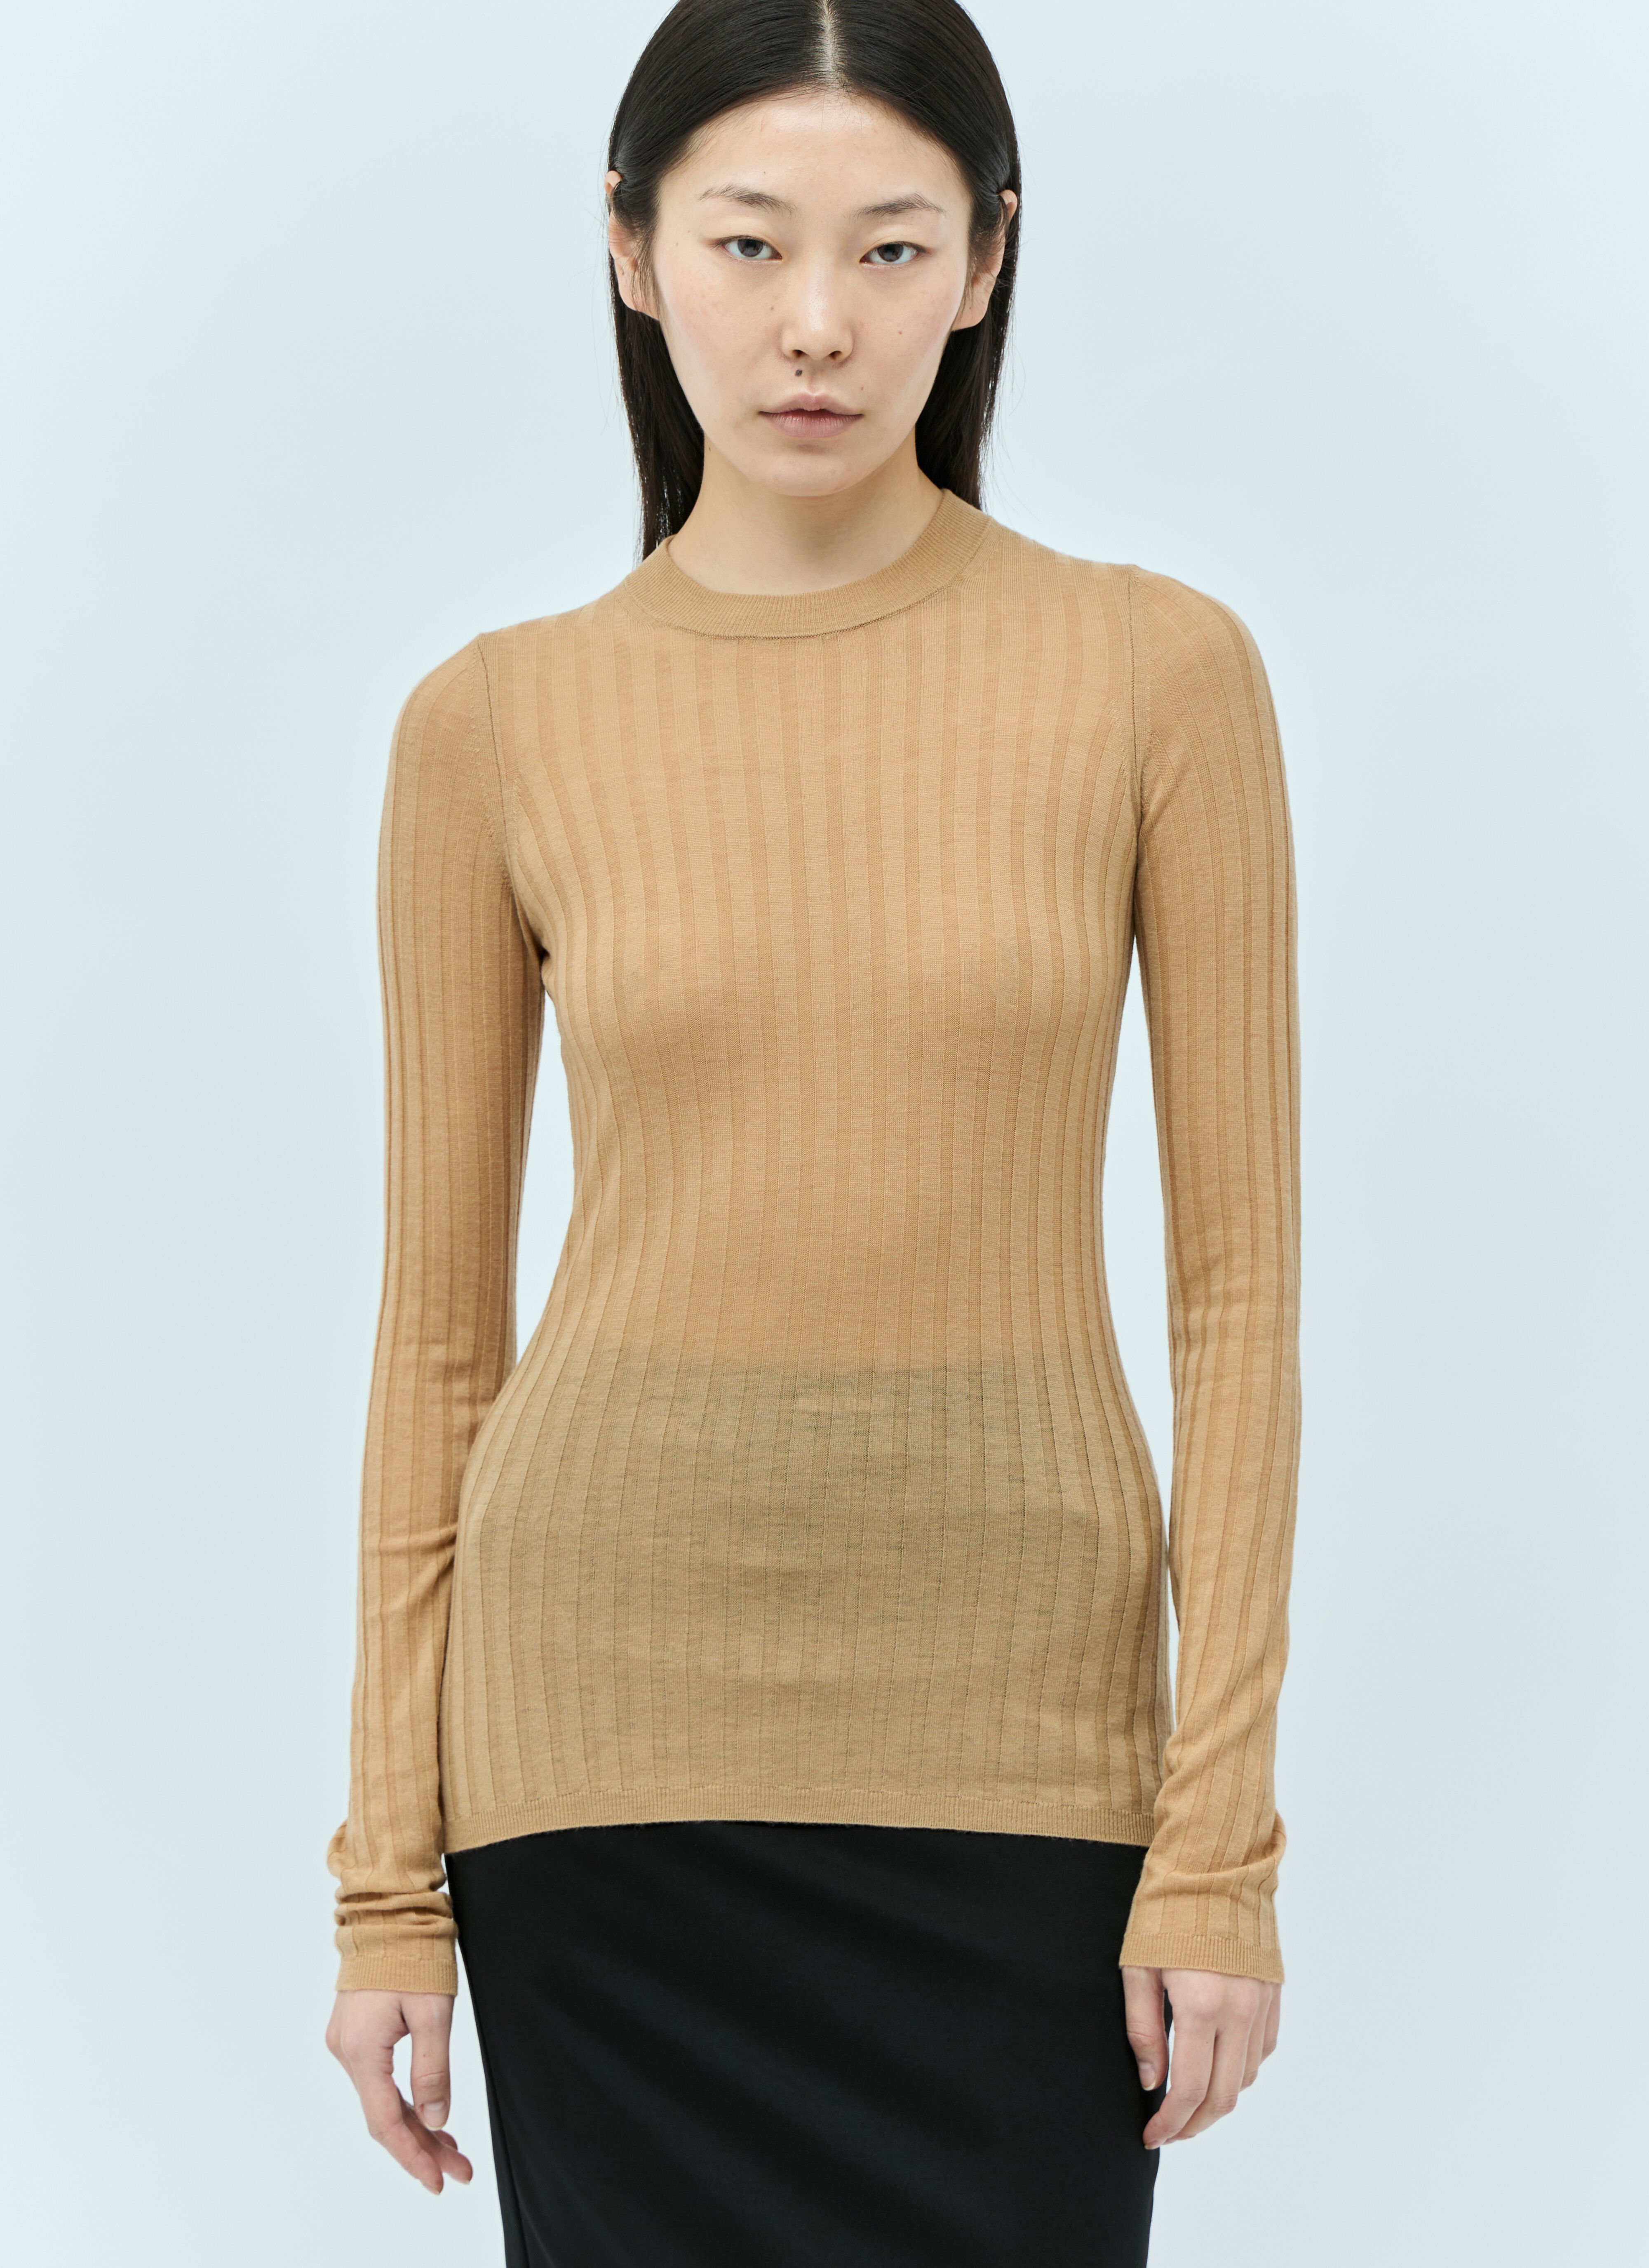 Sportmax Ribbed Wool Sweater White spx0256010